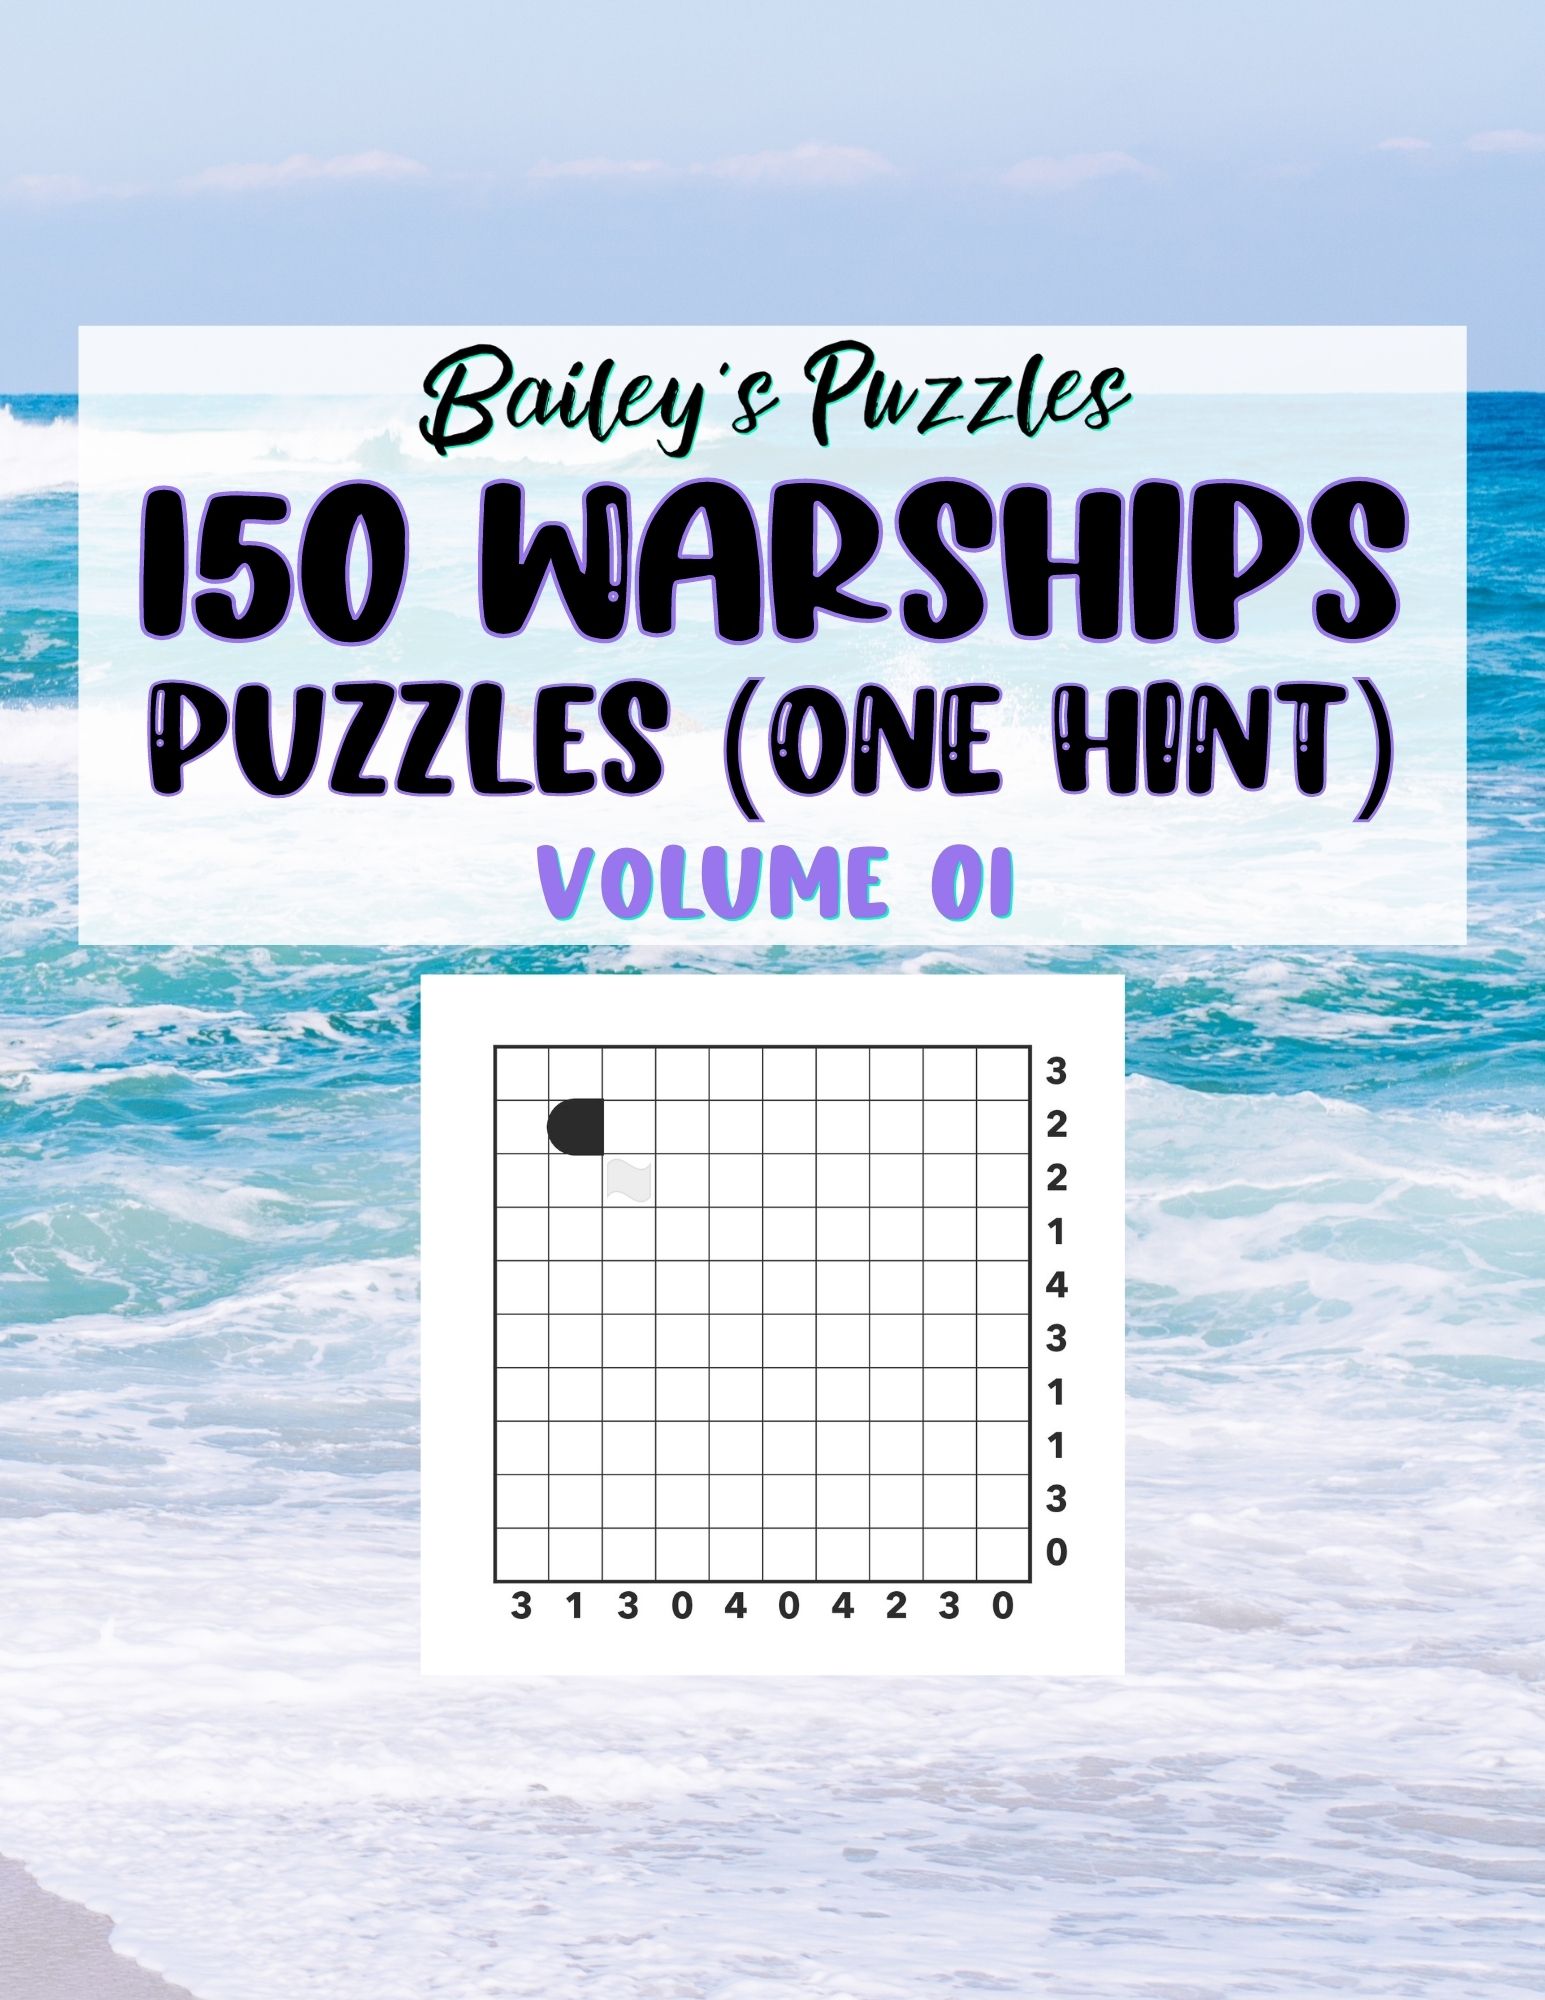 Front Cover - 150 Warships Puzzles (1 hints)